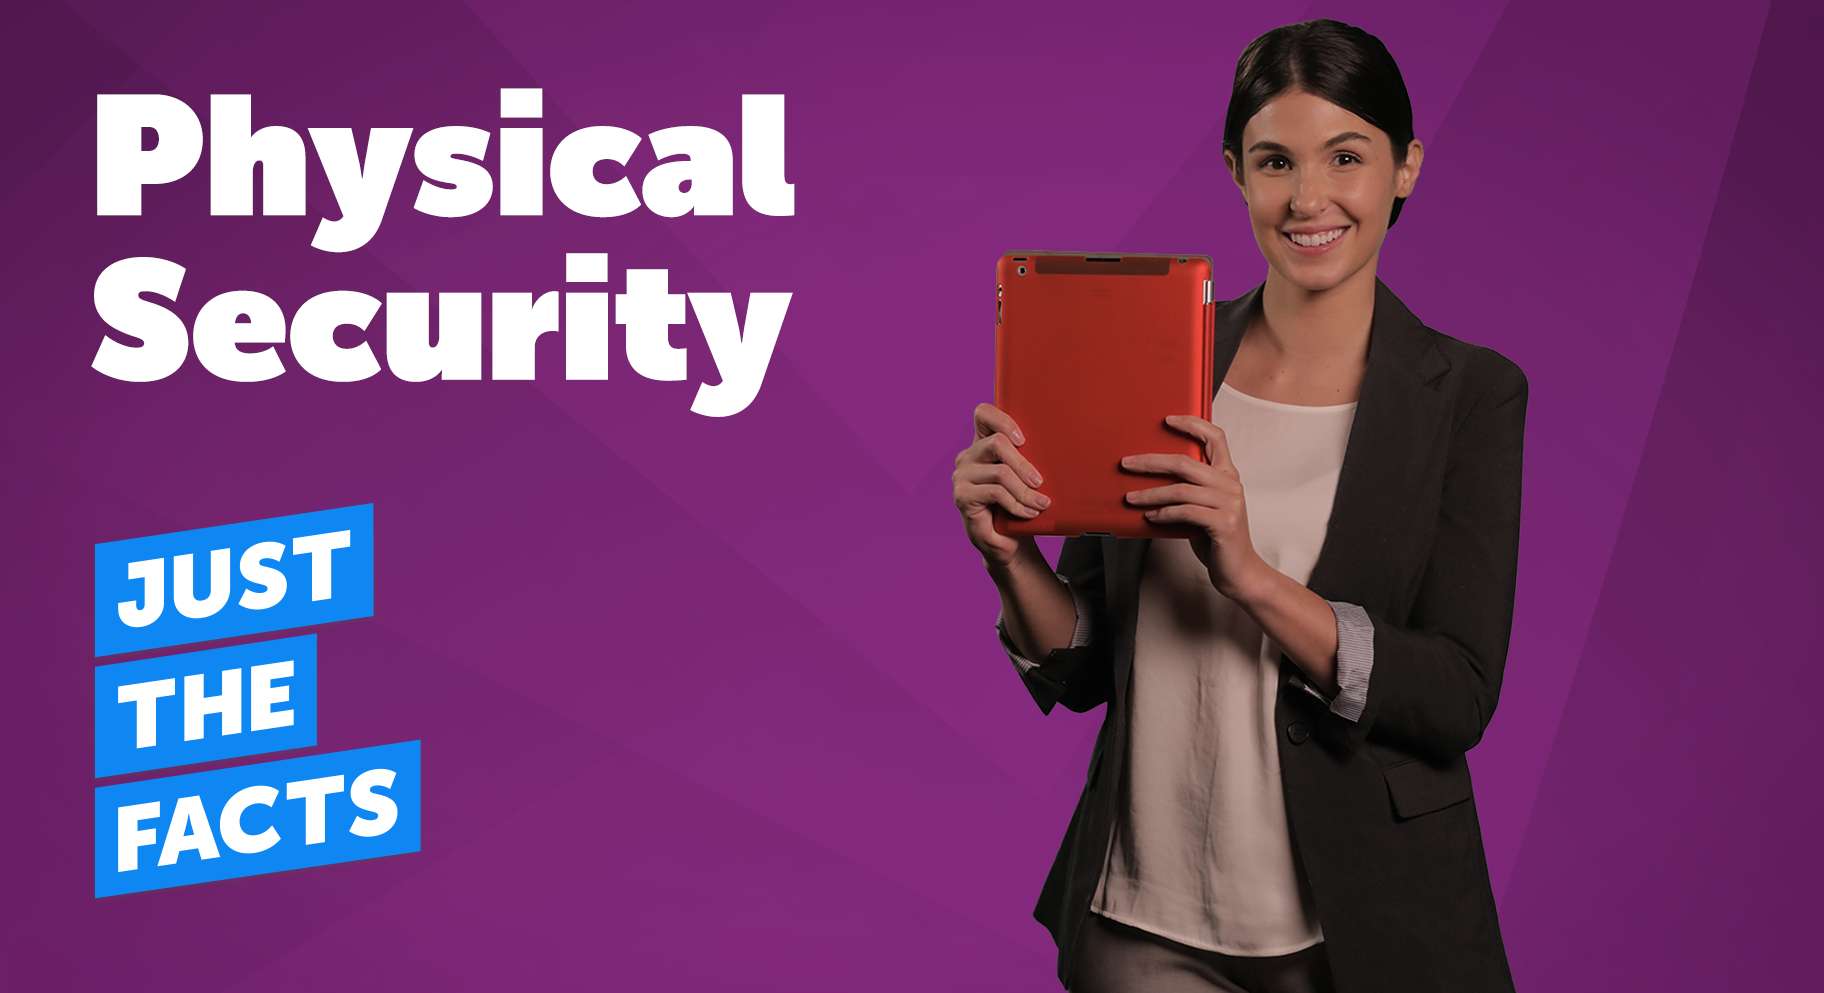 Just the Facts: Physical Security